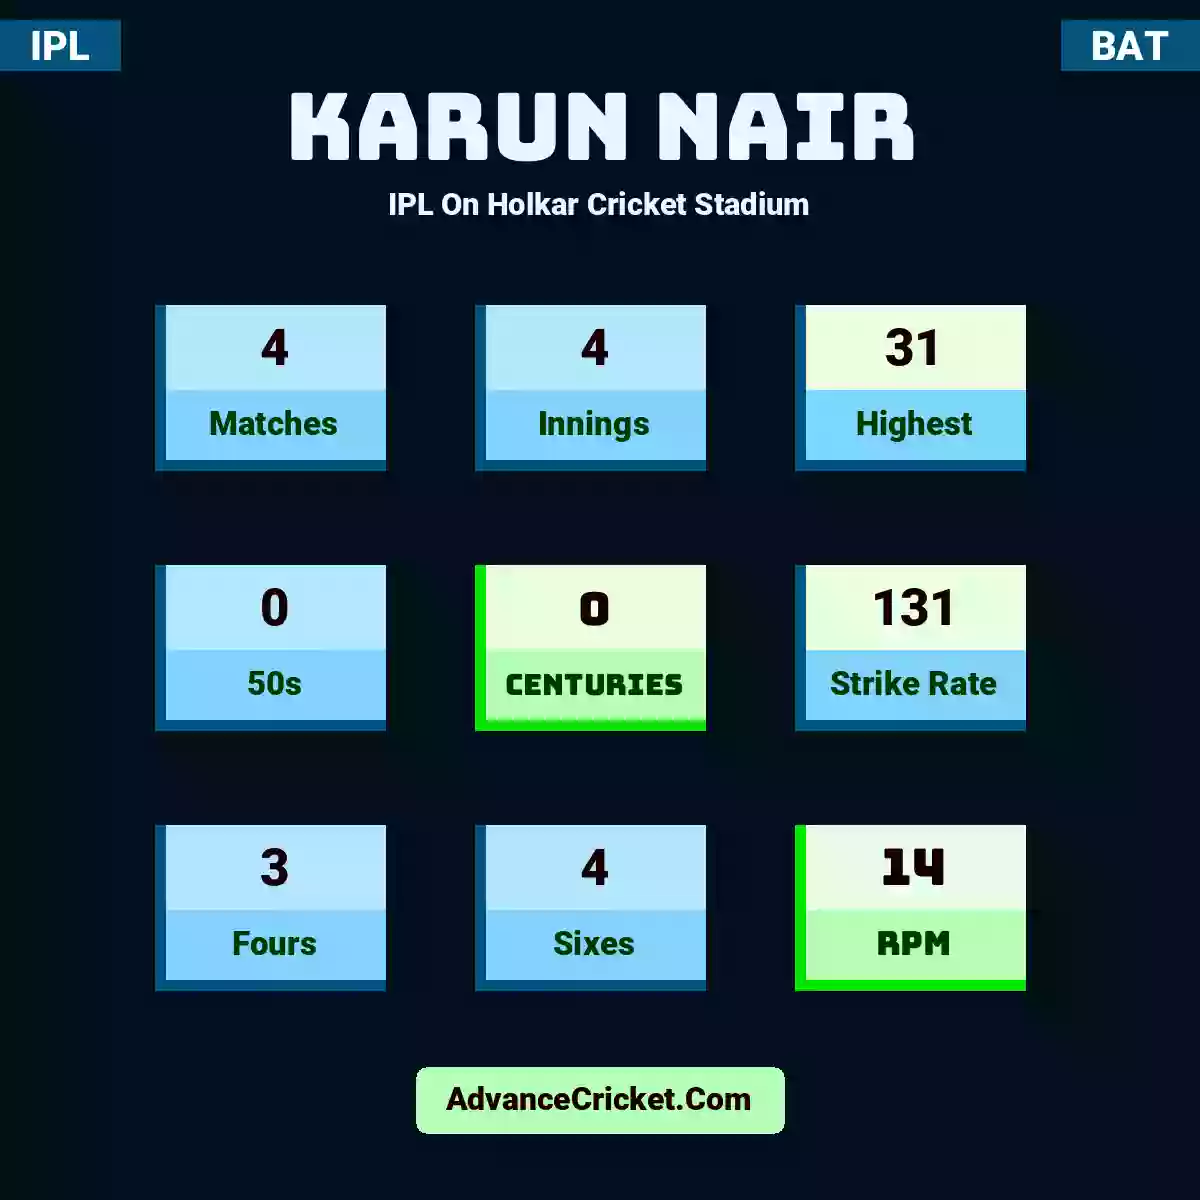 Karun Nair IPL  On Holkar Cricket Stadium, Karun Nair played 4 matches, scored 31 runs as highest, 0 half-centuries, and 0 centuries, with a strike rate of 131. K.Nair hit 3 fours and 4 sixes, with an RPM of 14.